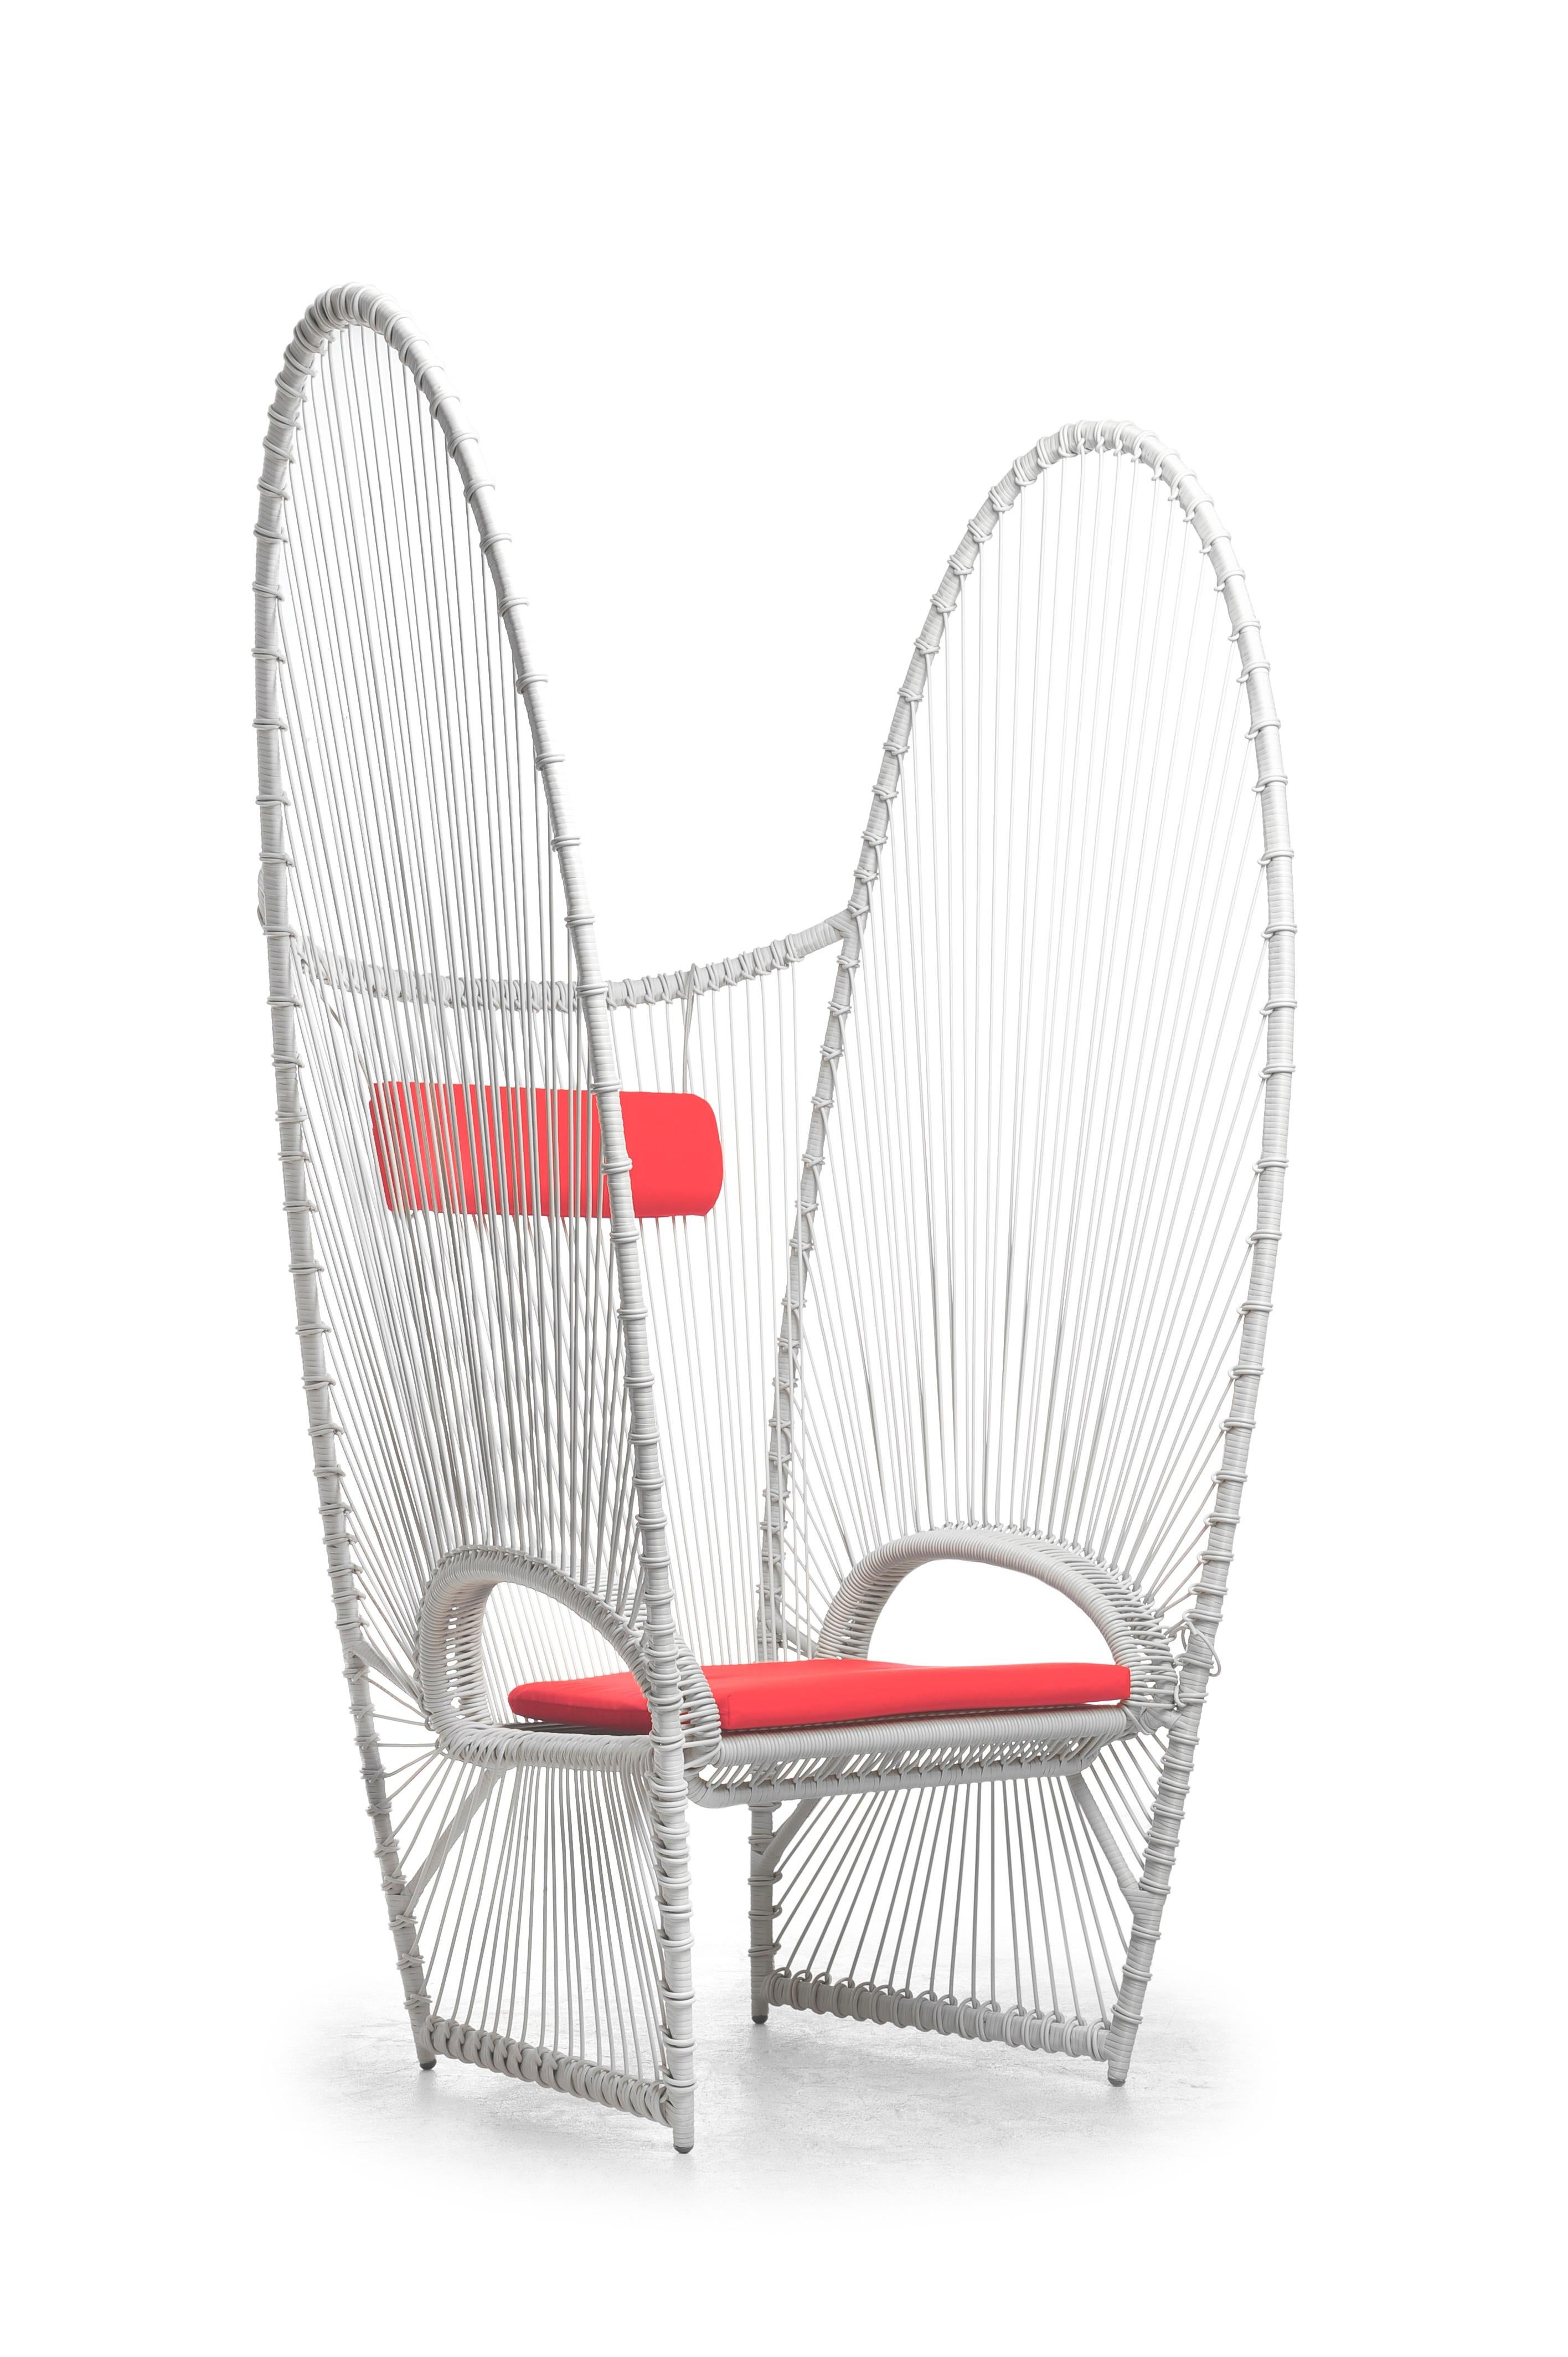 Papillon Easy armchair by Kenneth Cobonpue.
Materials: Polyethelene, Steel.
Also available in other colors.
Dimensions: 91cm x 108cm x H 192cm 

The Papillon easy armchair and swing feature handwoven polyethylene on a frame that’s shaped to